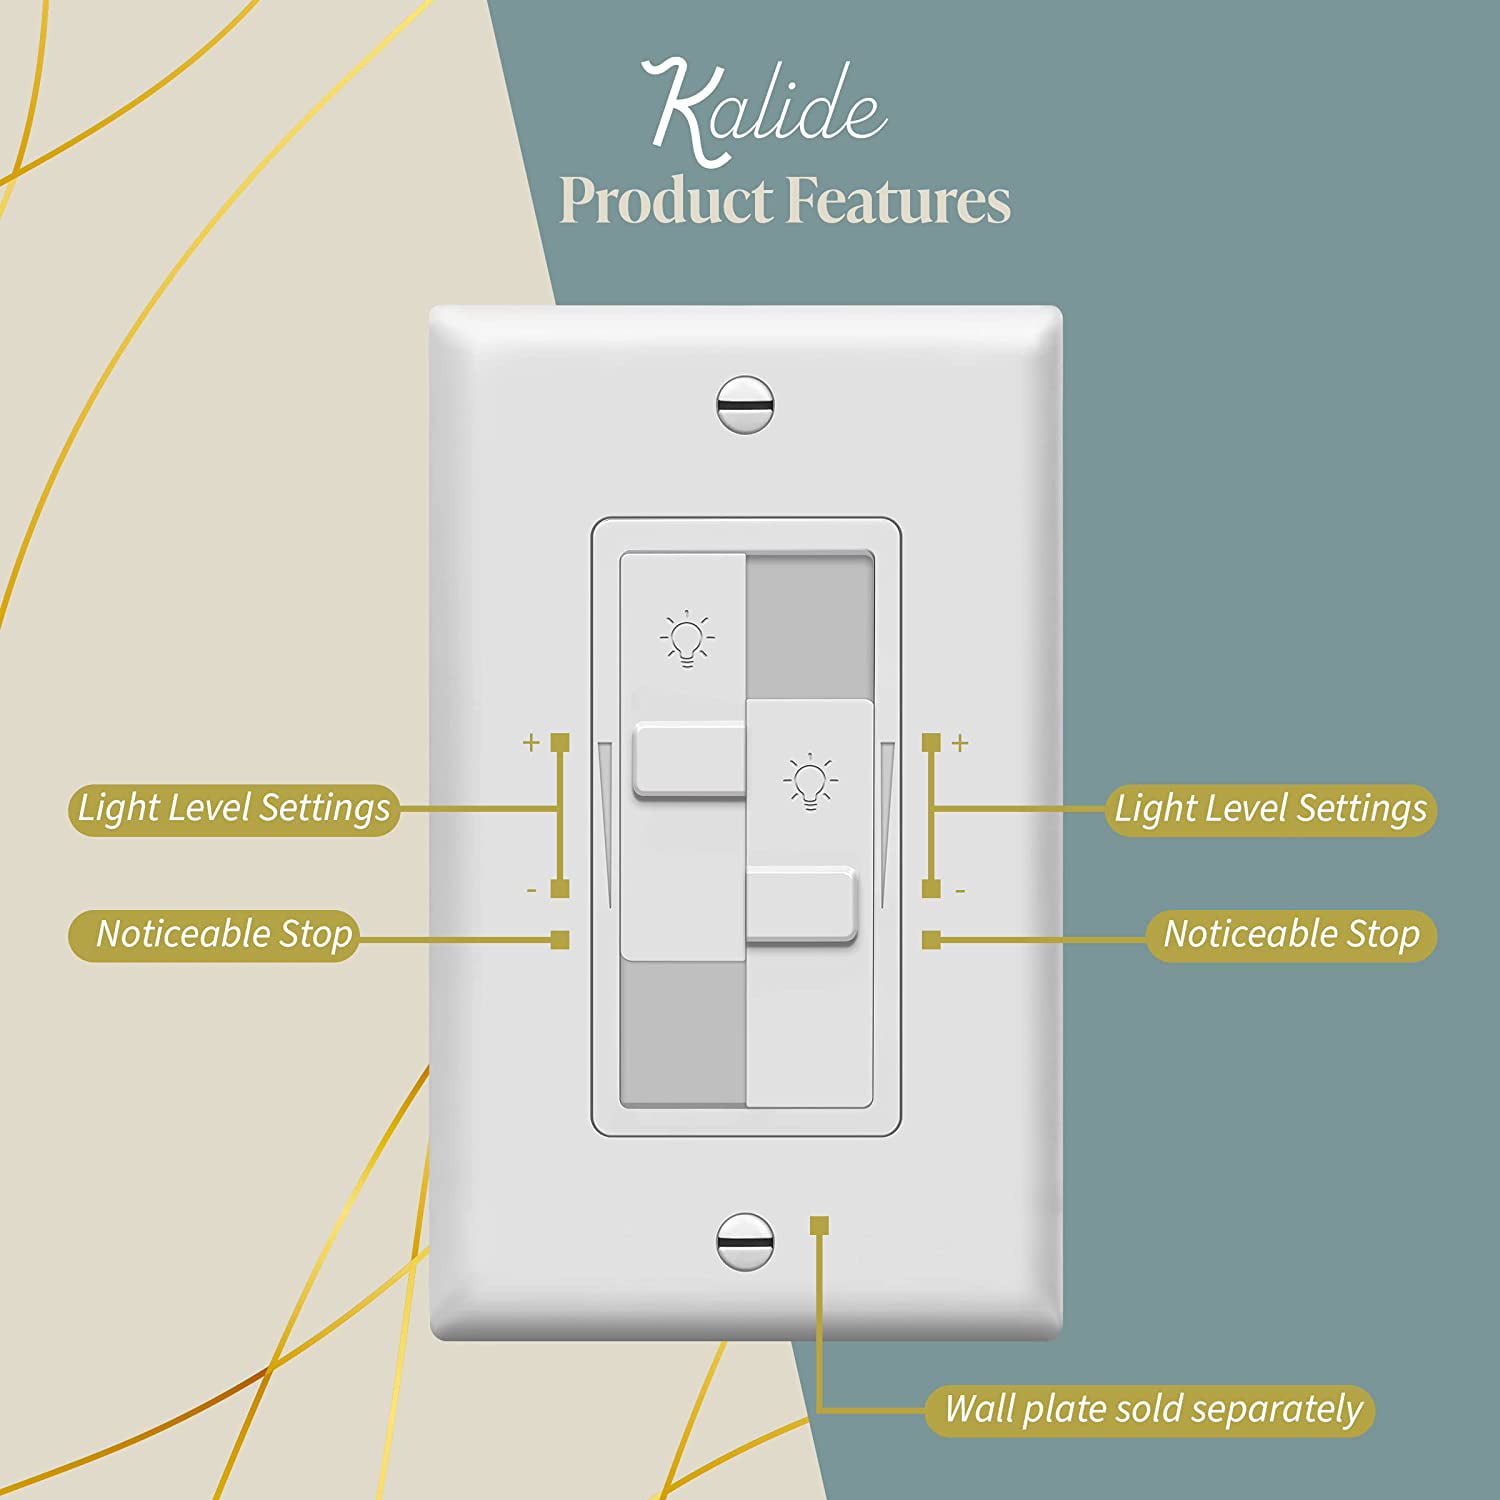 TOPGREENER Kalide Dual Load Dimmer Light Switch, Double LED Dimmer, Full  Range, Single Pole, 120VAC, 60Hz, 200W LED/CFL, Neutral Wire Not Required